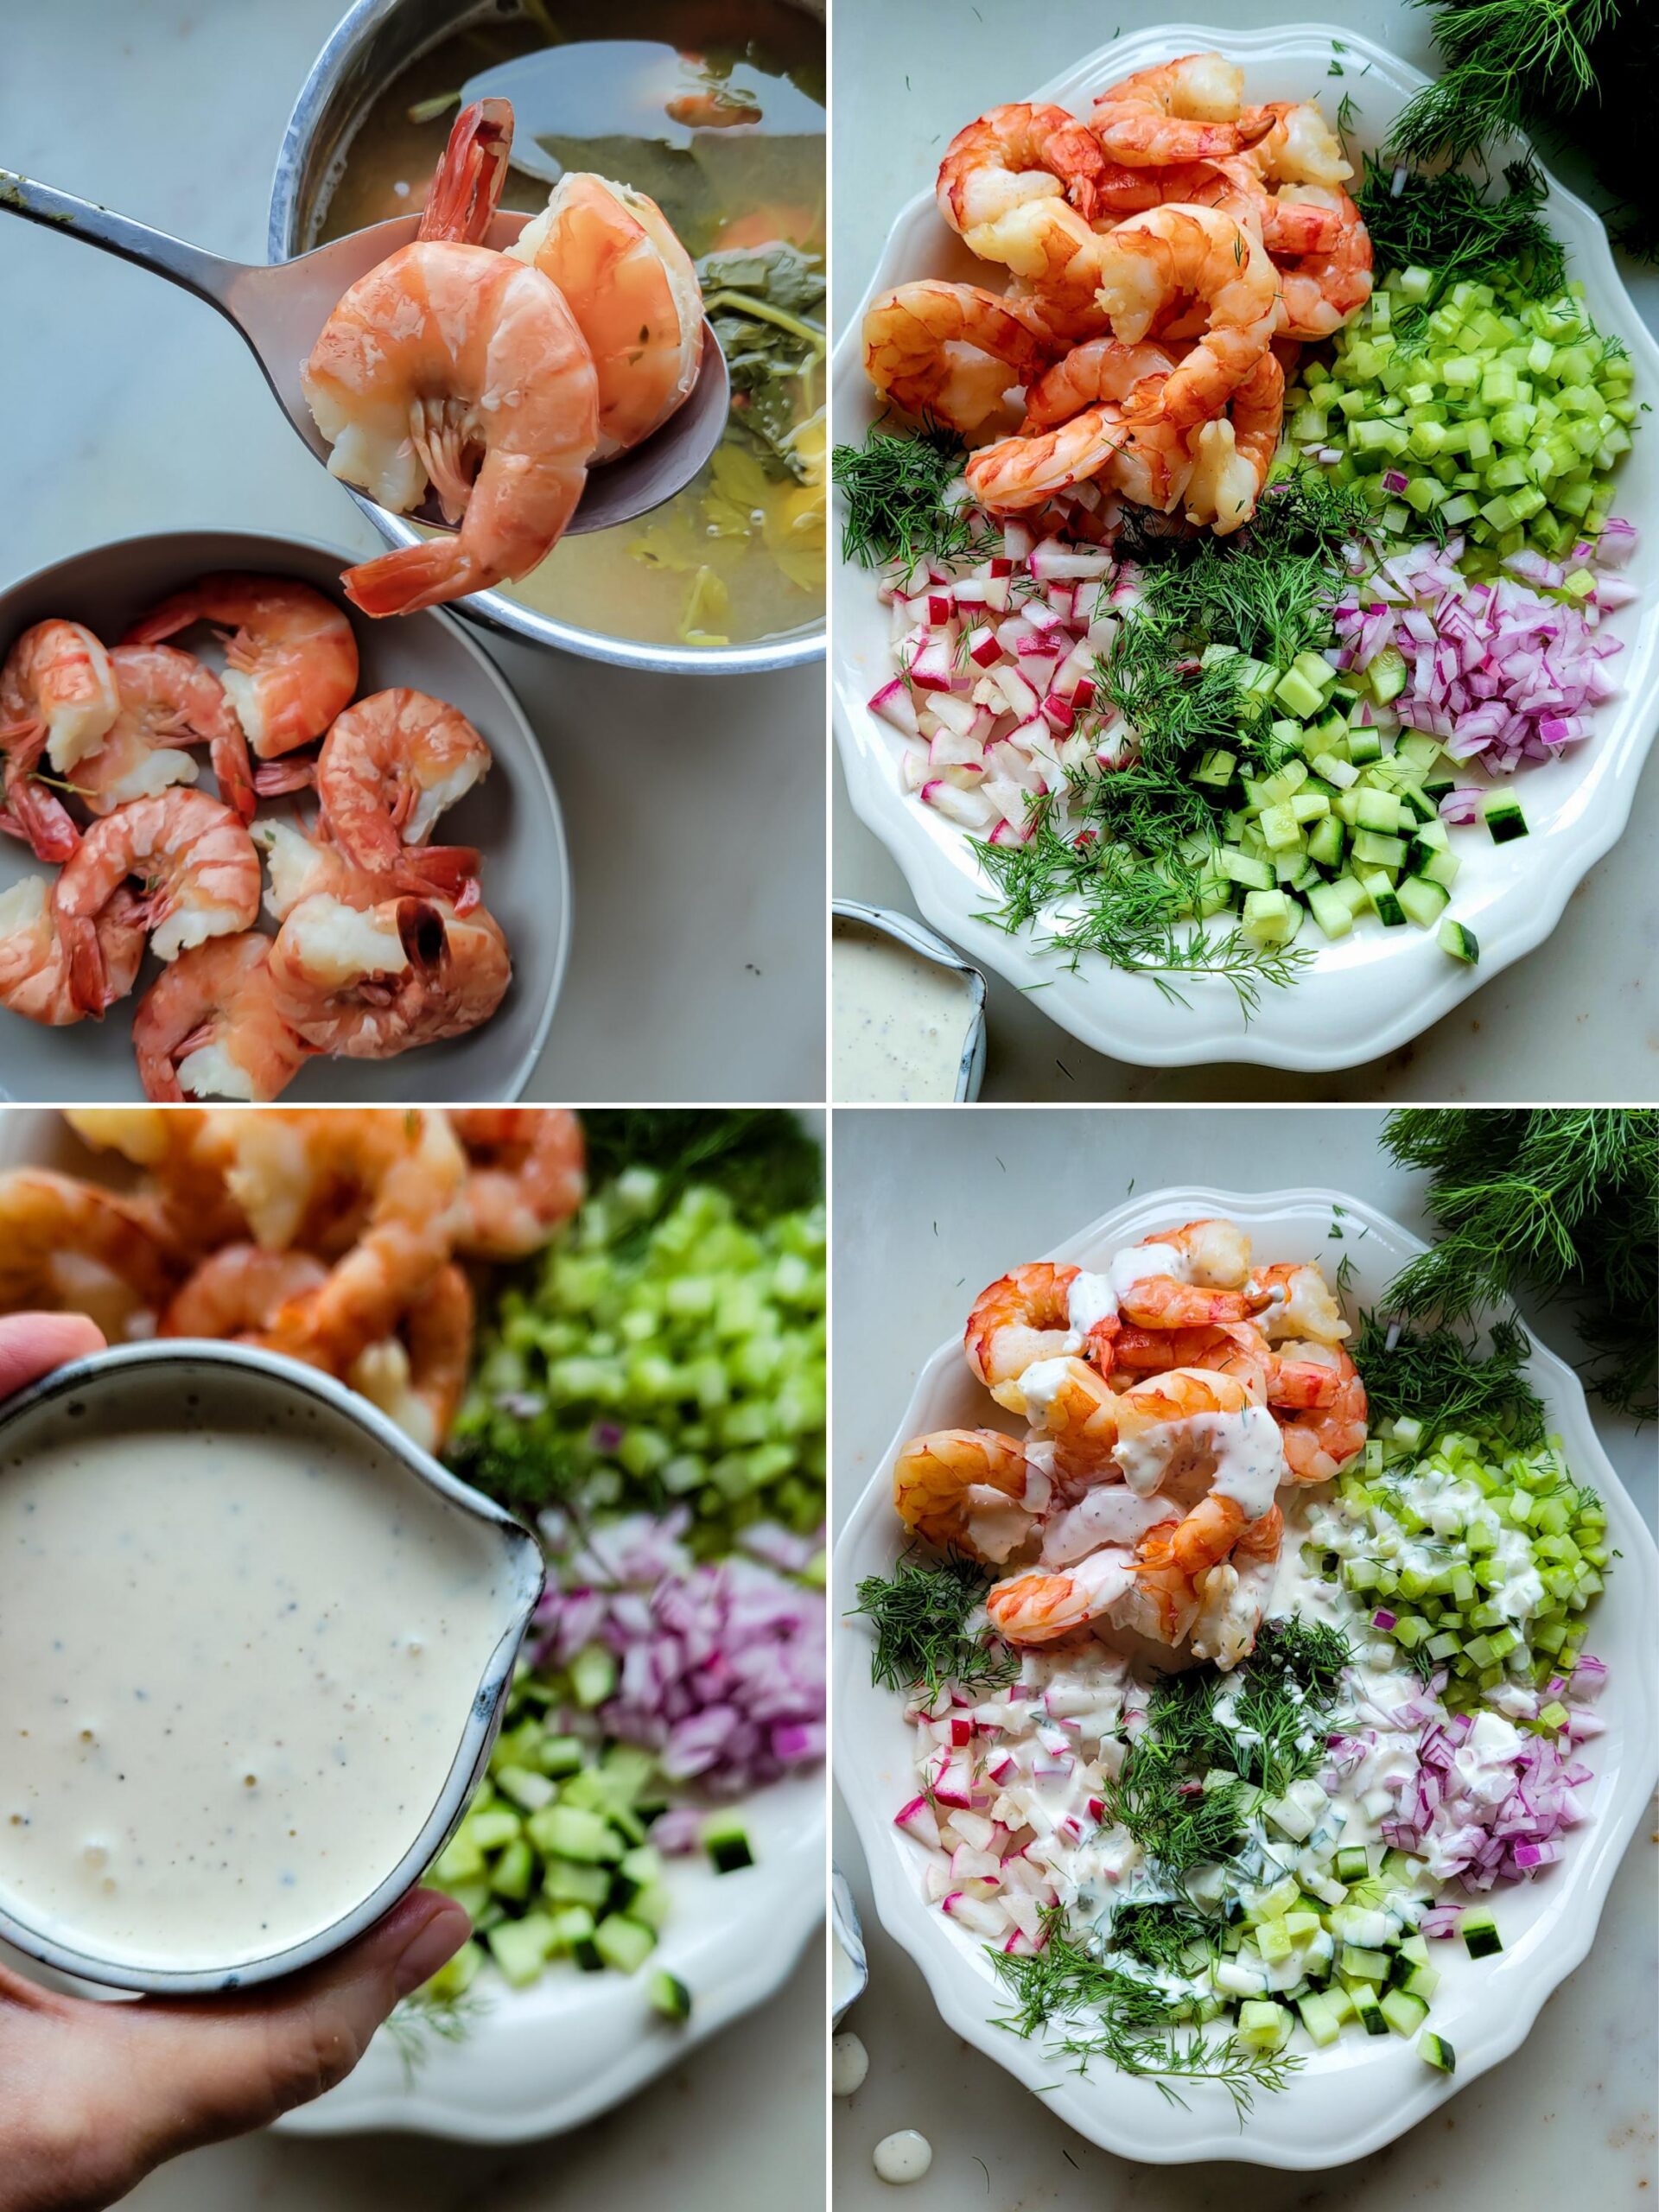 Collage showing the Stages of making Nordic Shrimp Salad, including poaching the shrimp, assembling the ingredients, and dressing the salad with the creamy dressing.